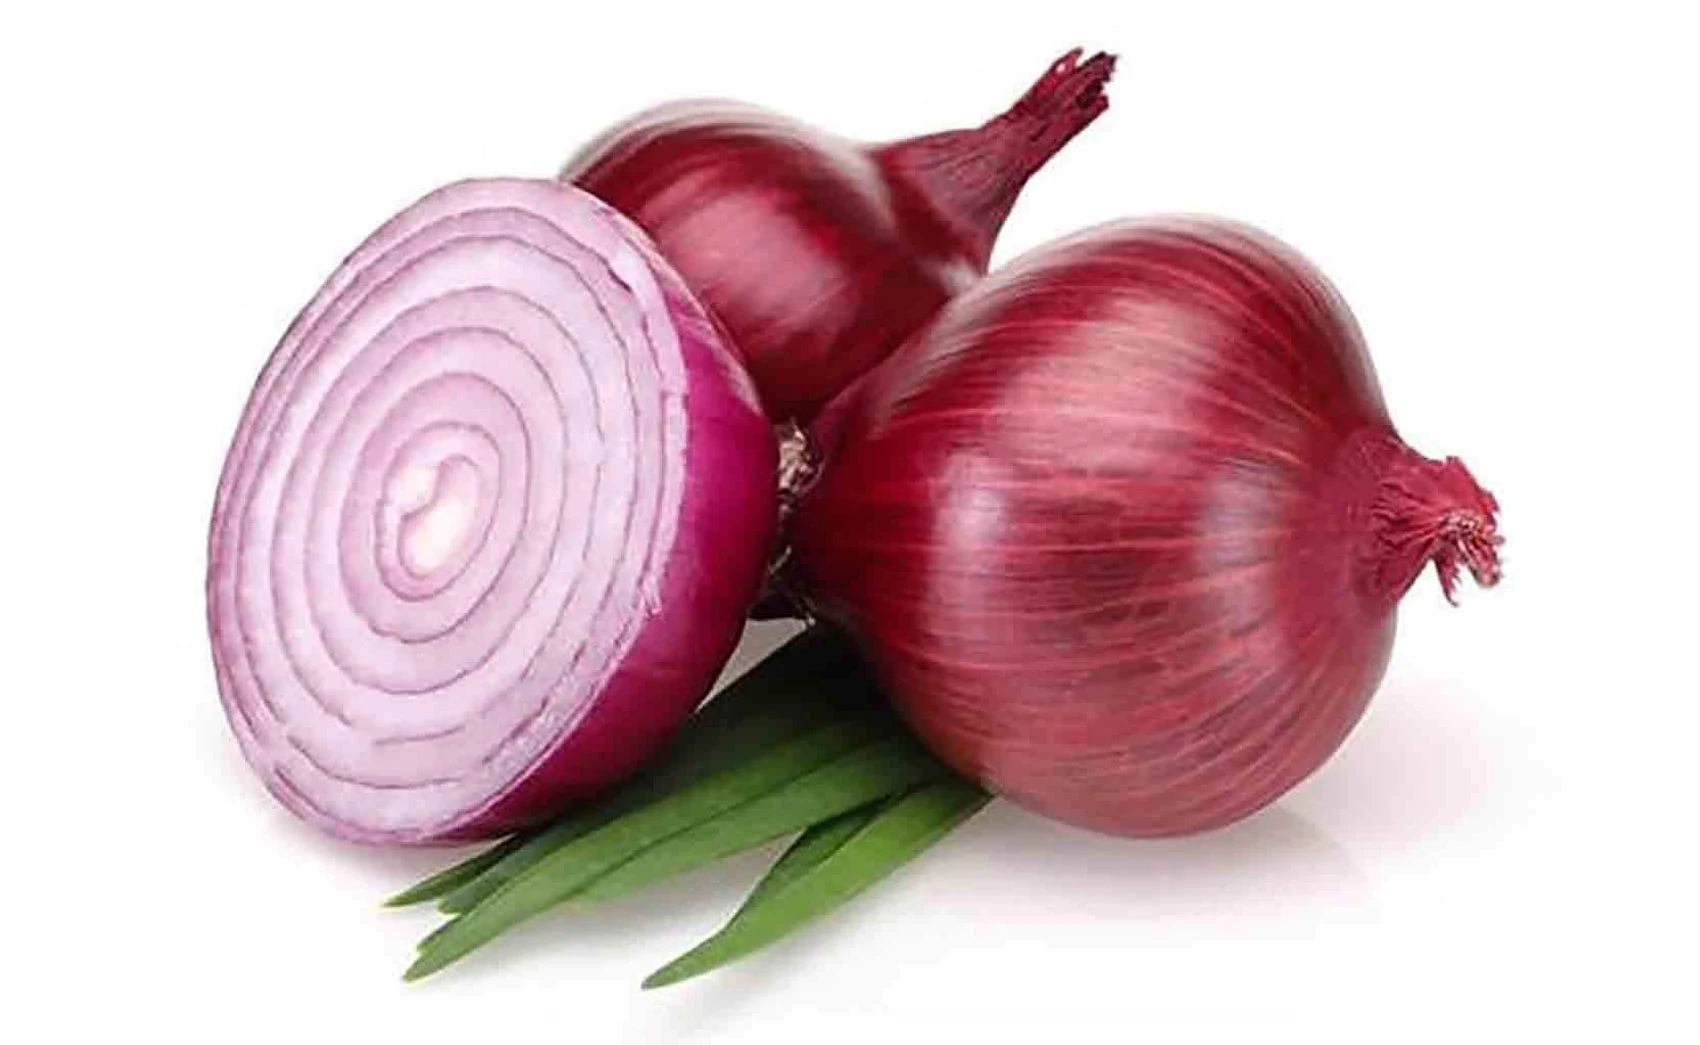 Red Onion image - Agro trade for import & export [Mahdy Fresh - since 2000]